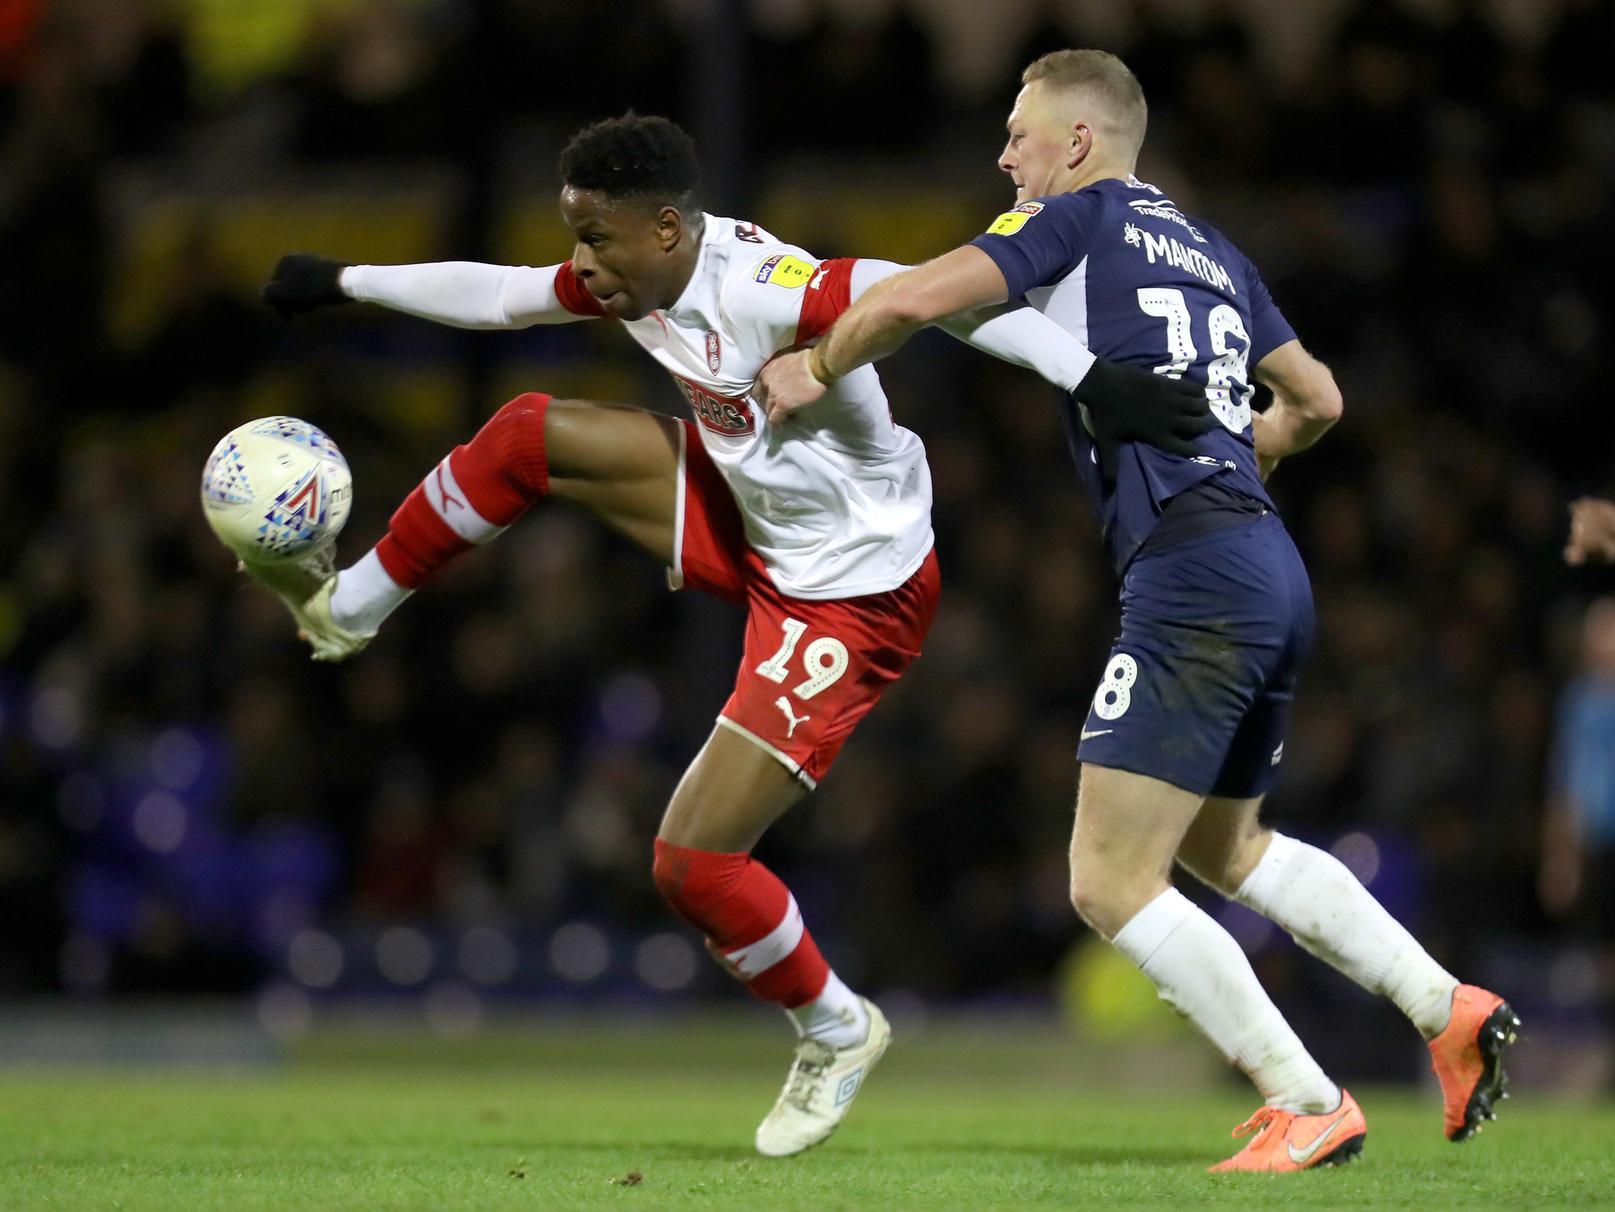 Paul Warne has stated Rotherham might have a difficult time keeping hold of Chiedozie Ogbene. (Yorkshire Post)